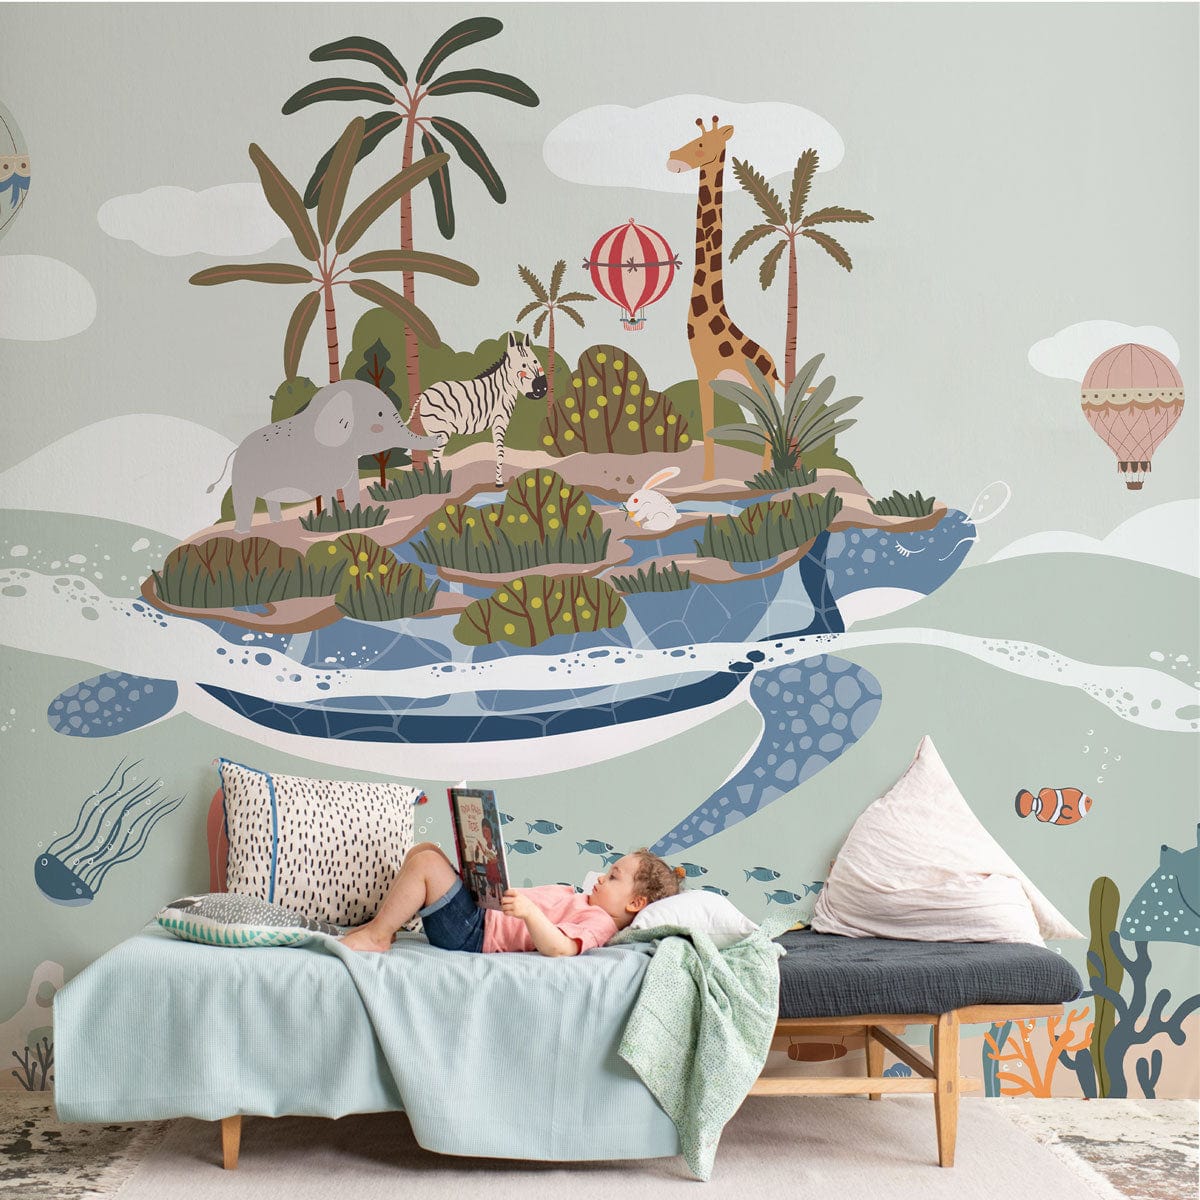 Turtle Island Wallpaper Mural for the Decoration of Children's Bedrooms